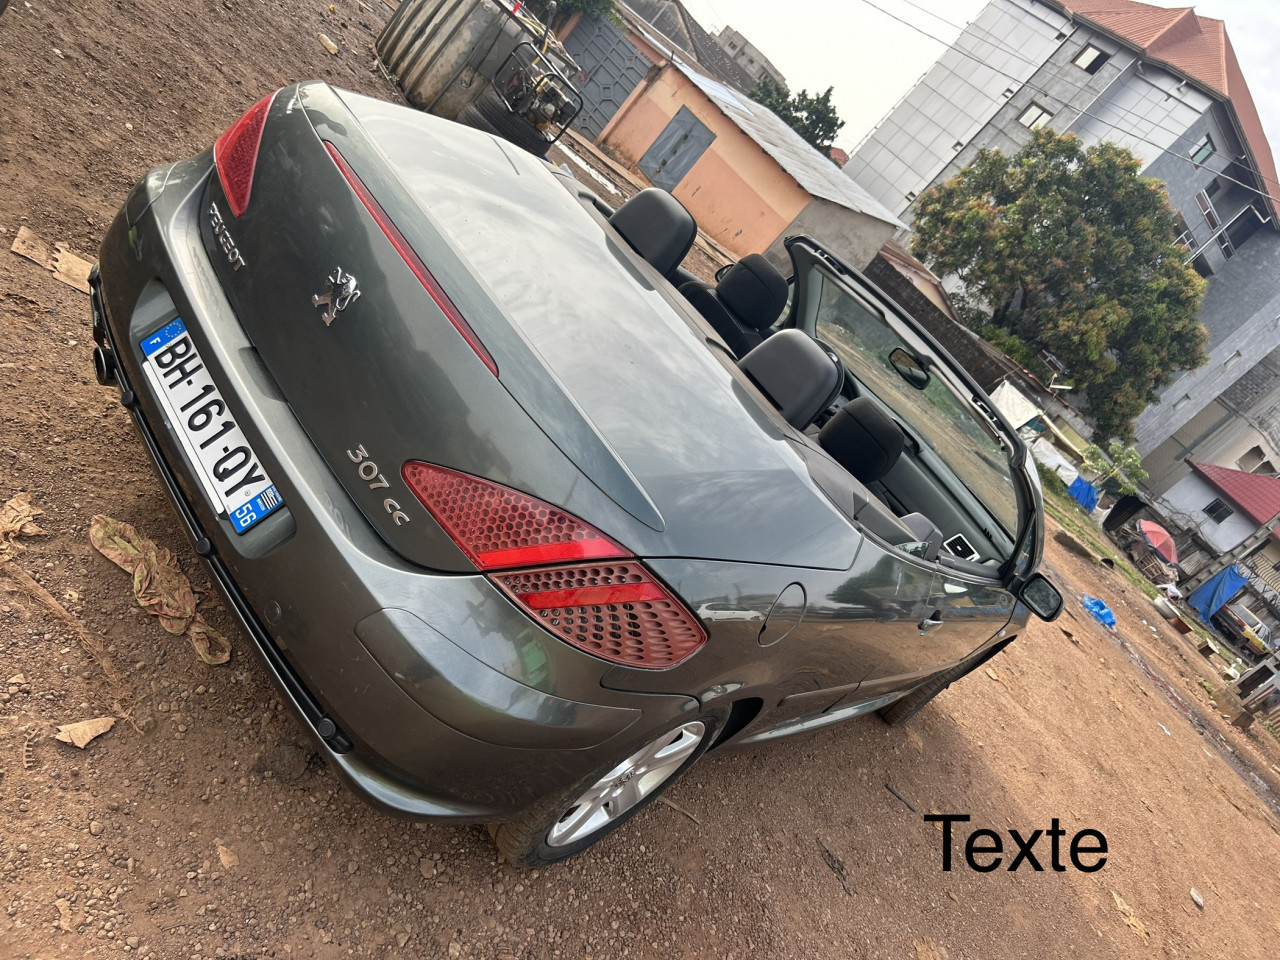 Peugeot 307, Voitures, Conakry